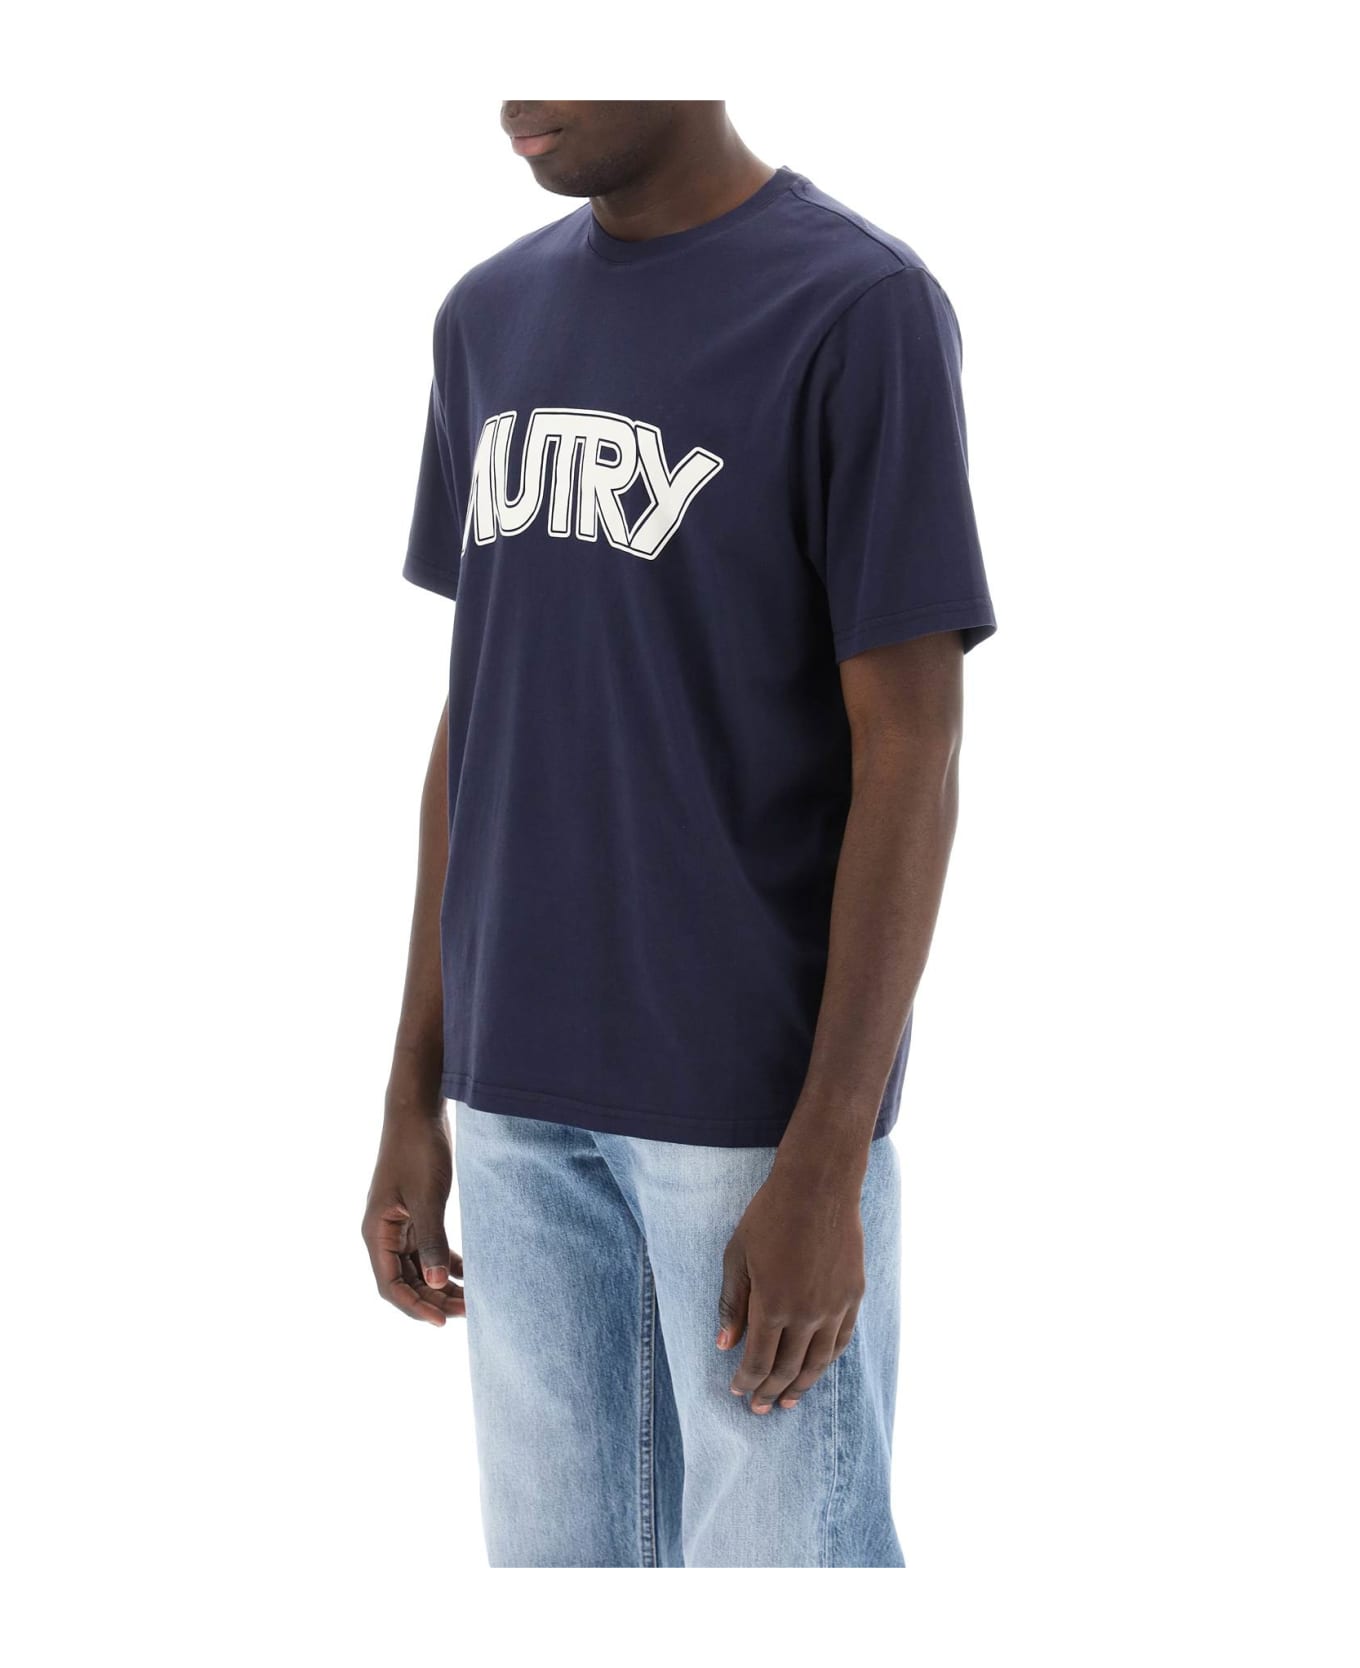 Autry T-shirt With Maxi Logo Print - Blue シャツ